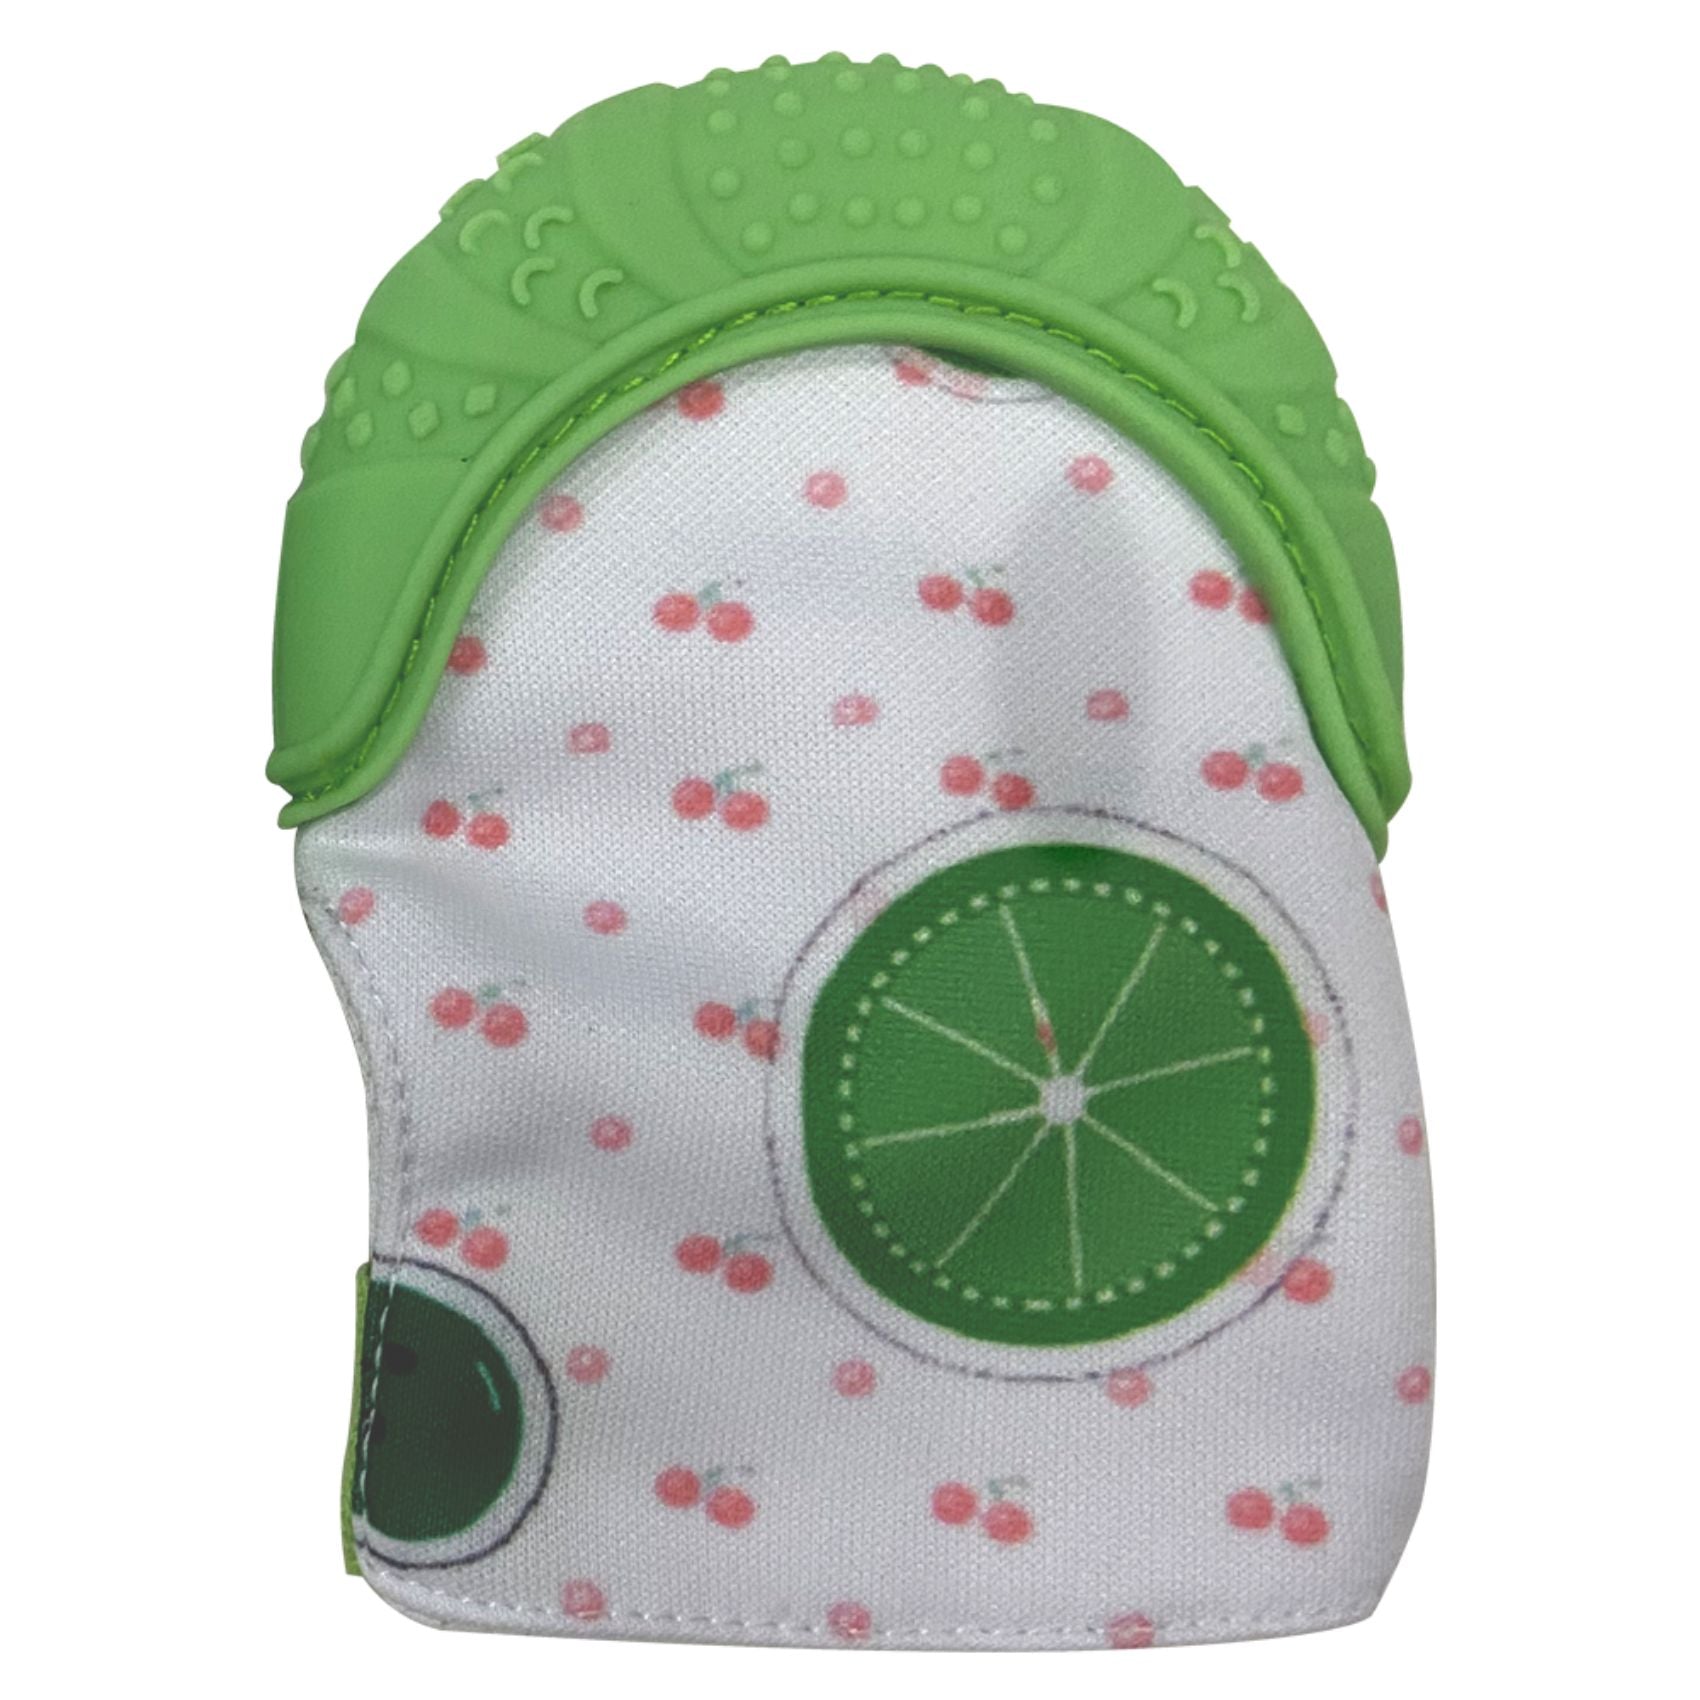 Baby Works - Bibibaby Teething Mitts - Mint